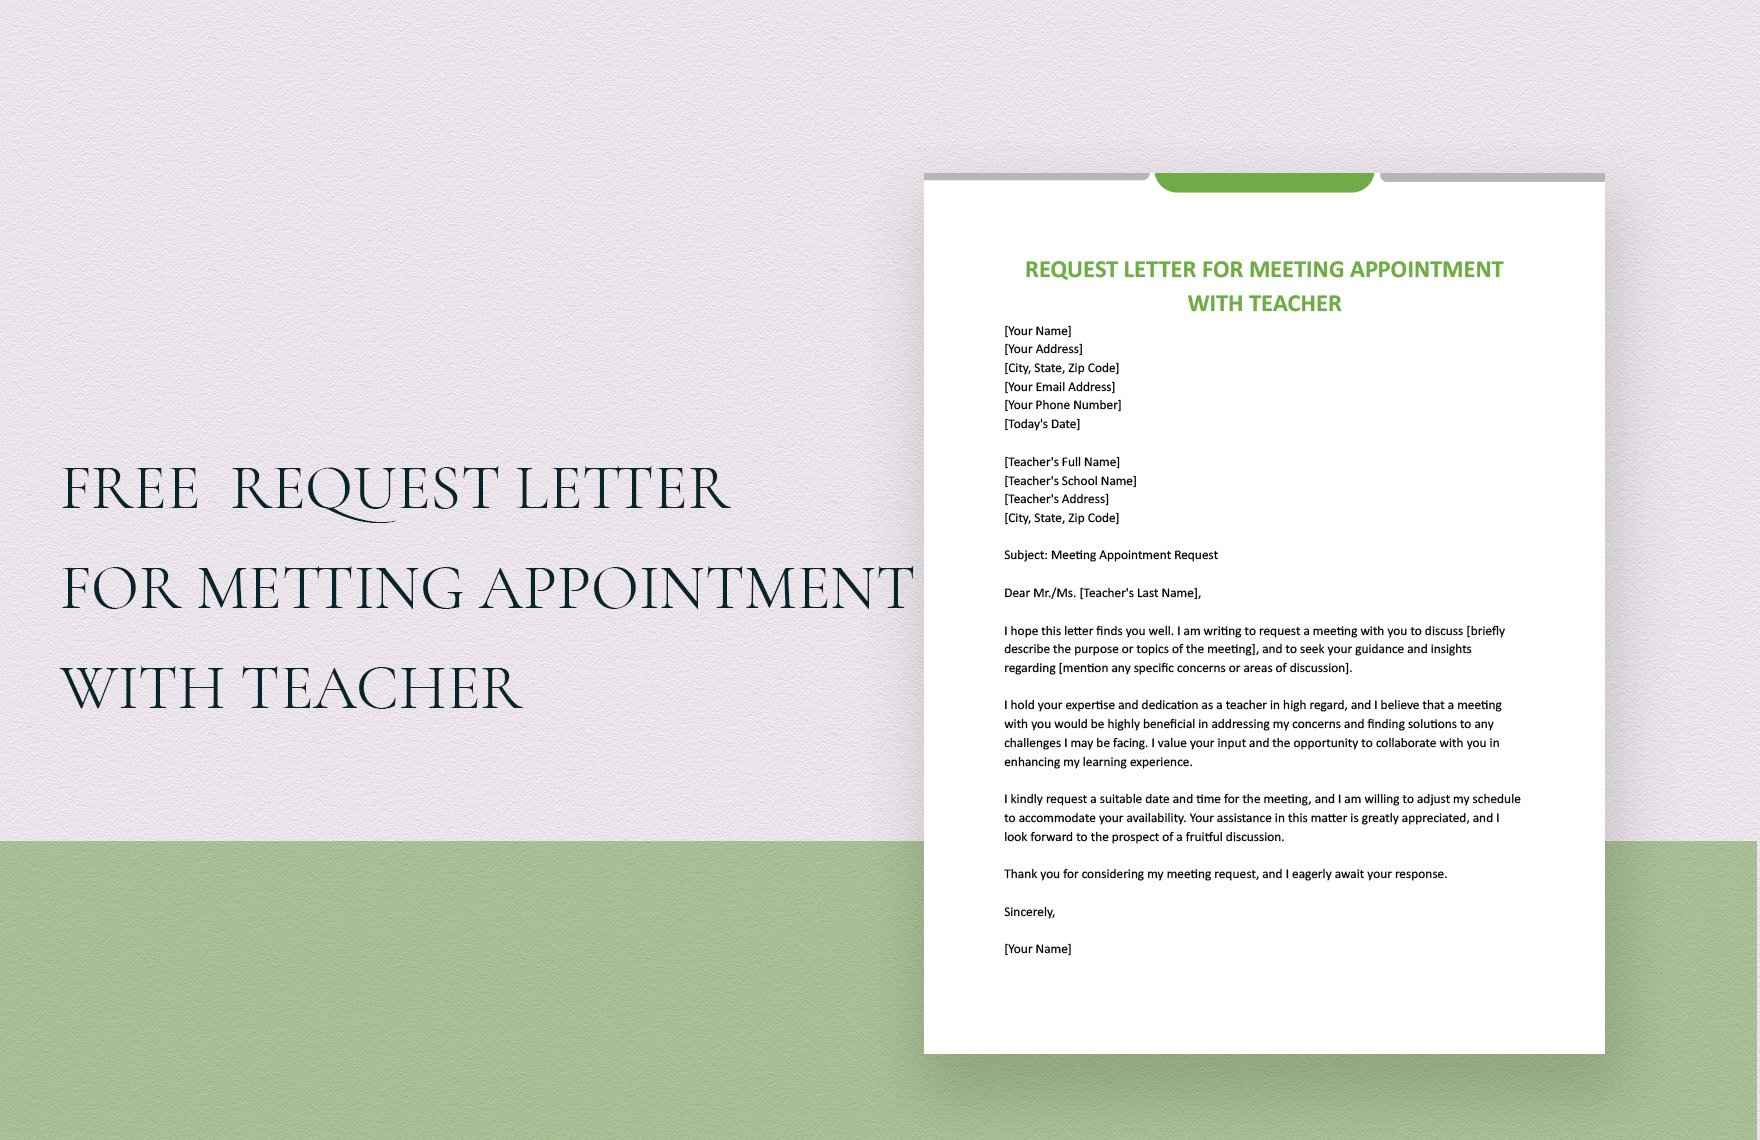 Request Letter For Meeting Appointment With Teacher